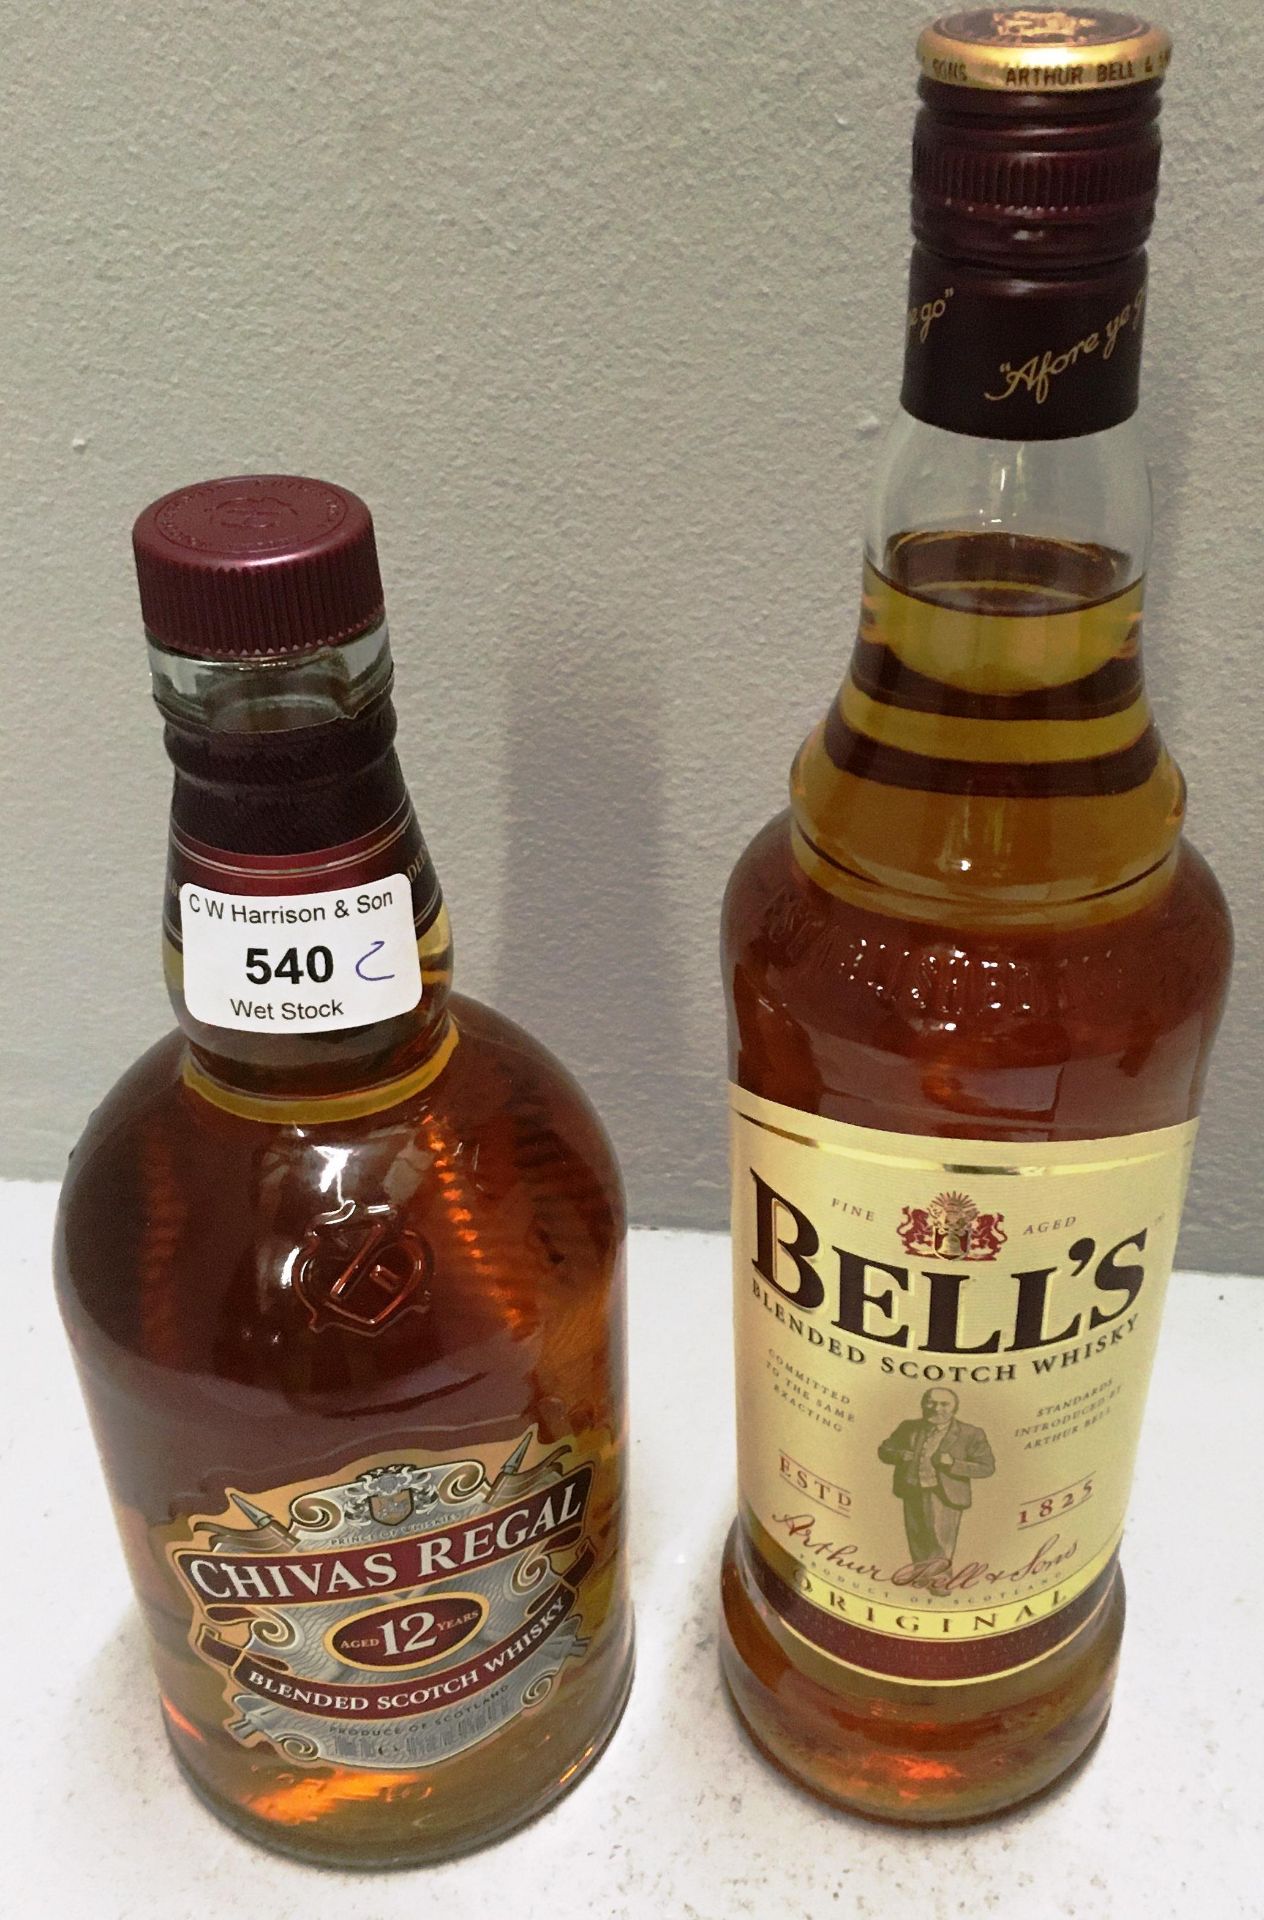 2 x items - 1 x 70cl bottle of Bell's Blended Scotch Whisky and 1 x 700cl bottle of Chivas Regal